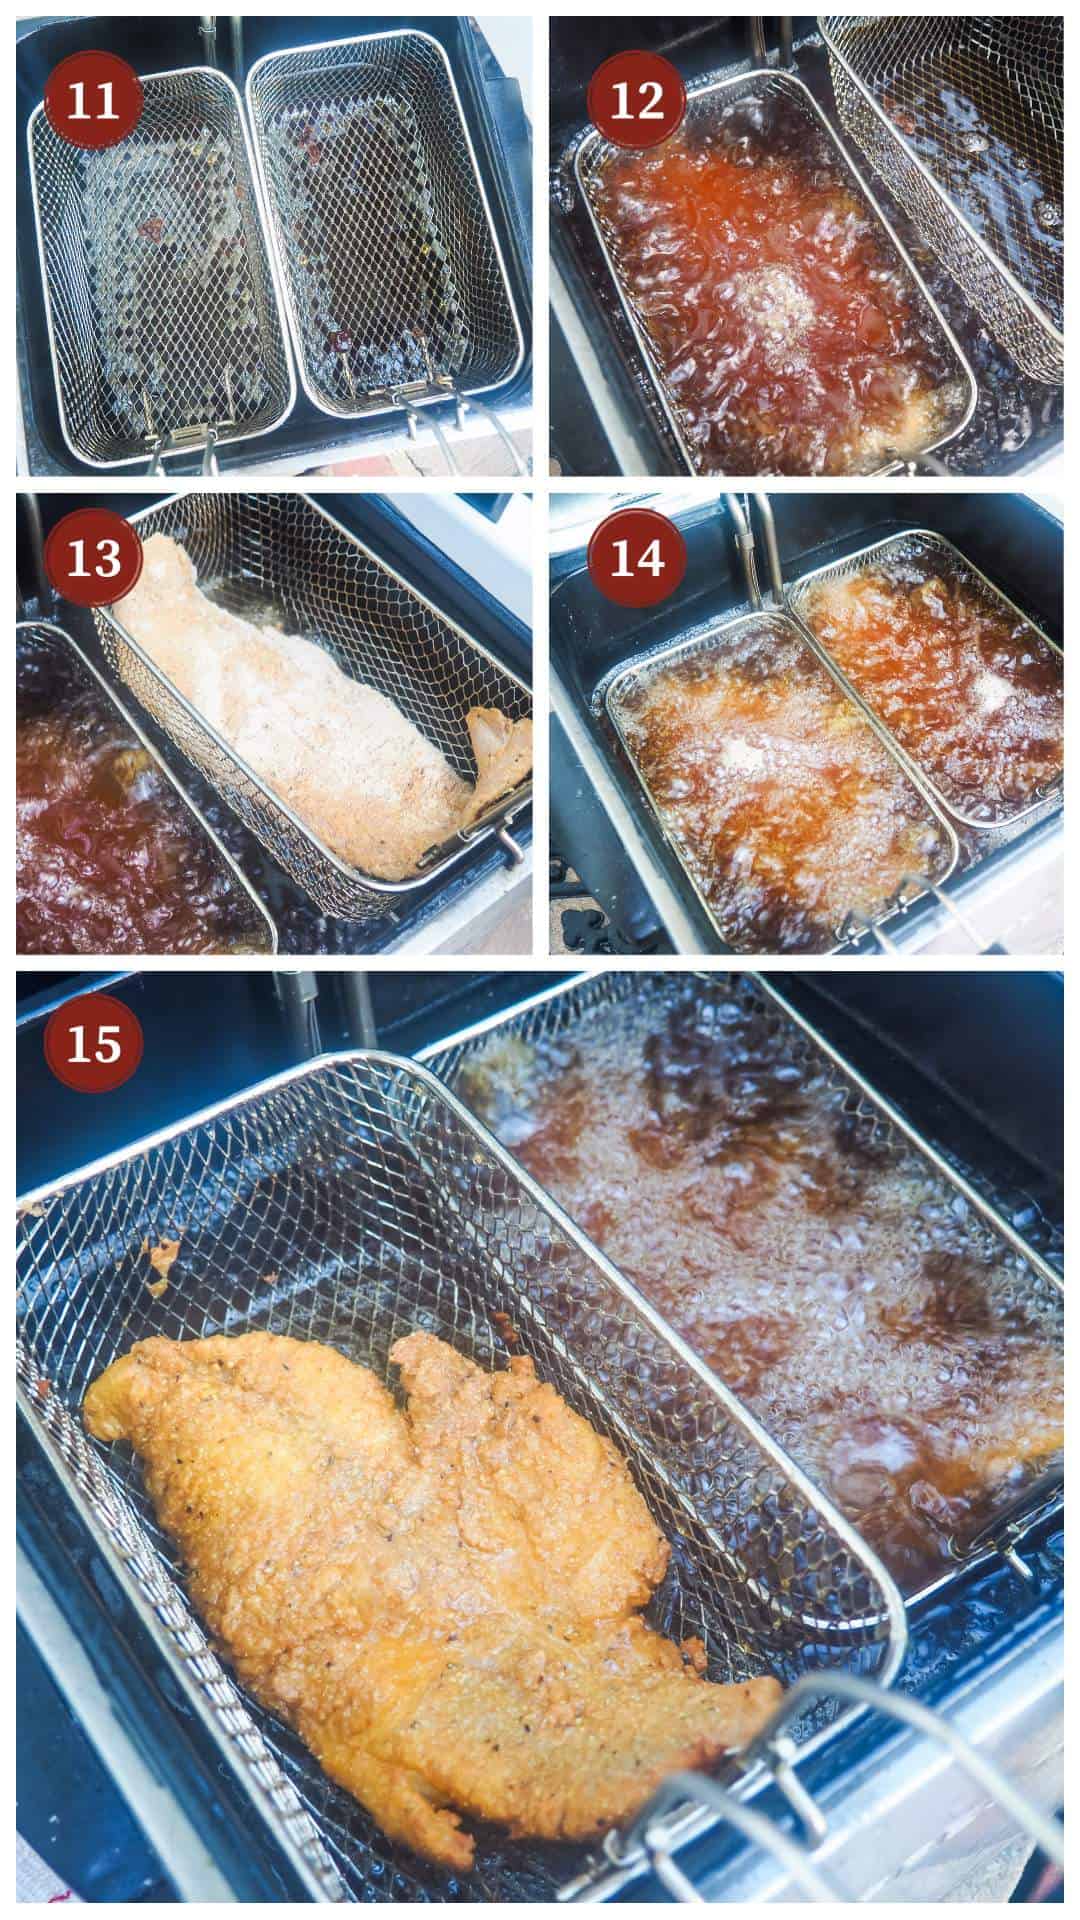 a process collage of images for frying catfish, steps 11 - 15